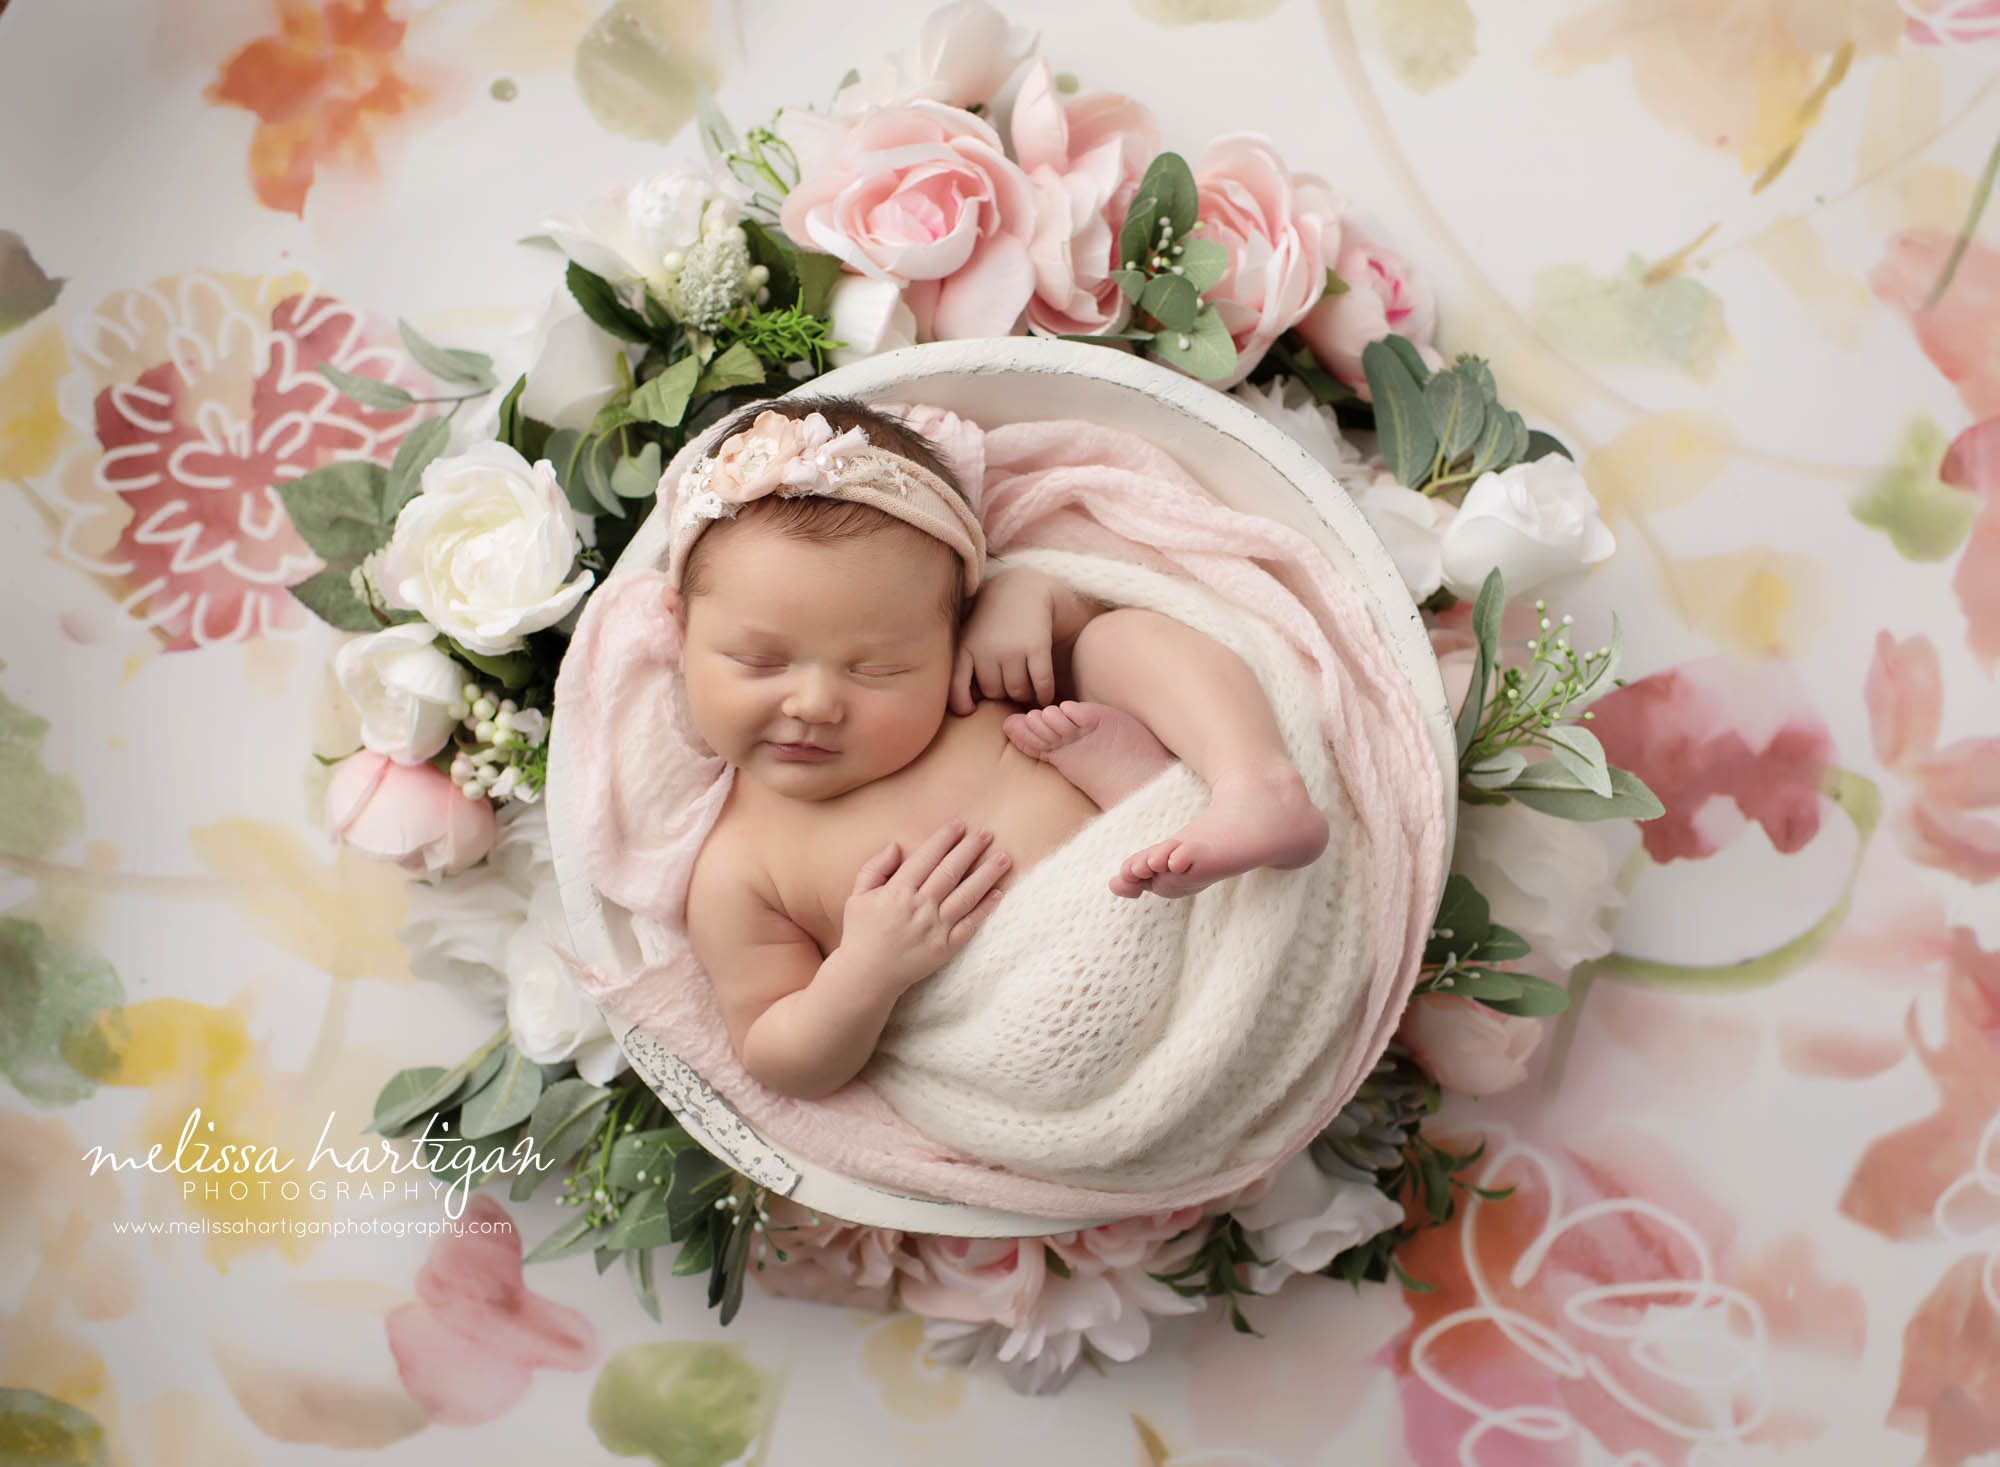 Baby girl posed in white wooden prop with pink florals around wooden bowl